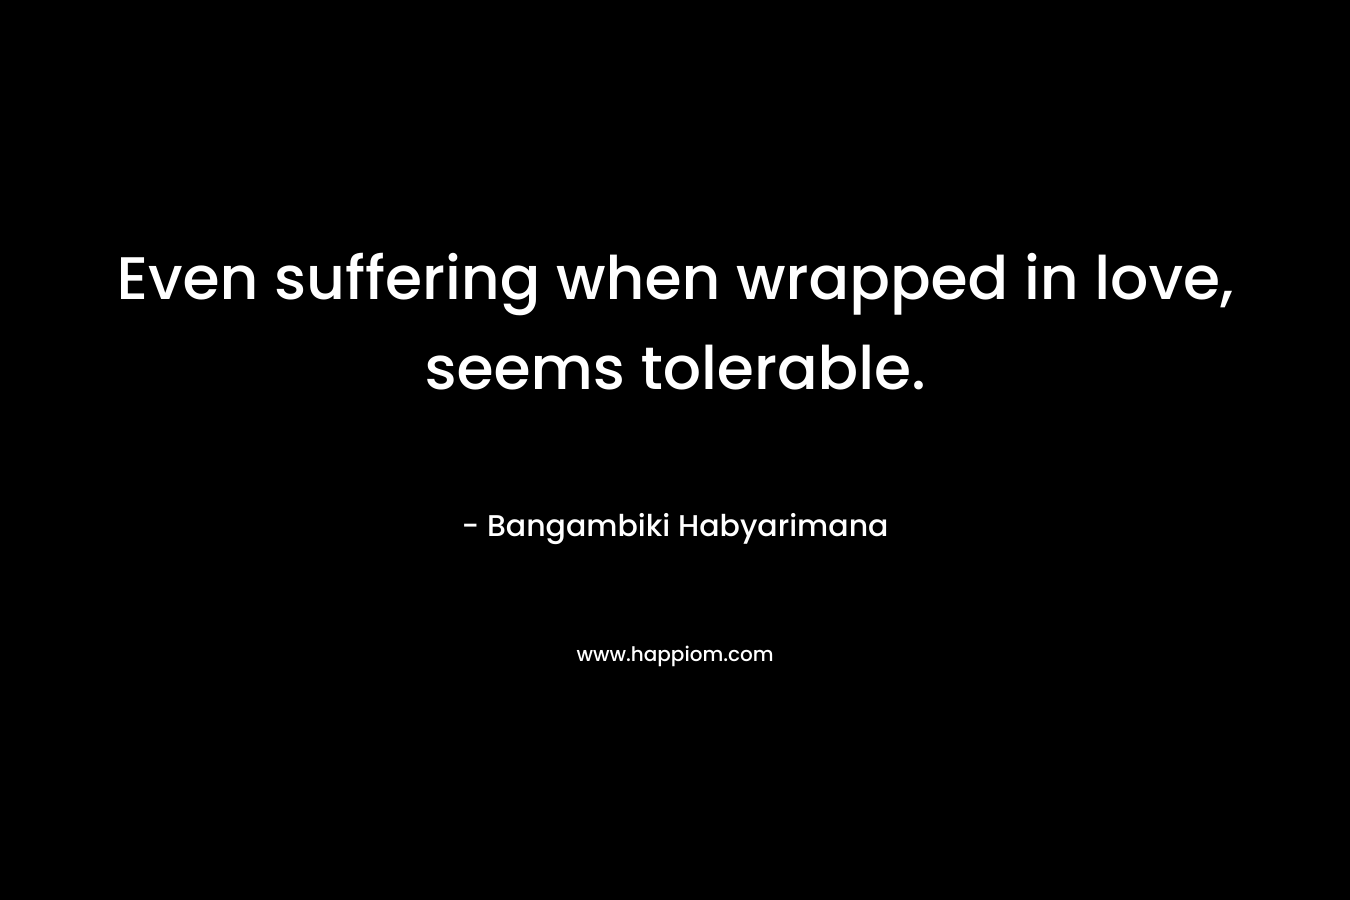 Even suffering when wrapped in love, seems tolerable.